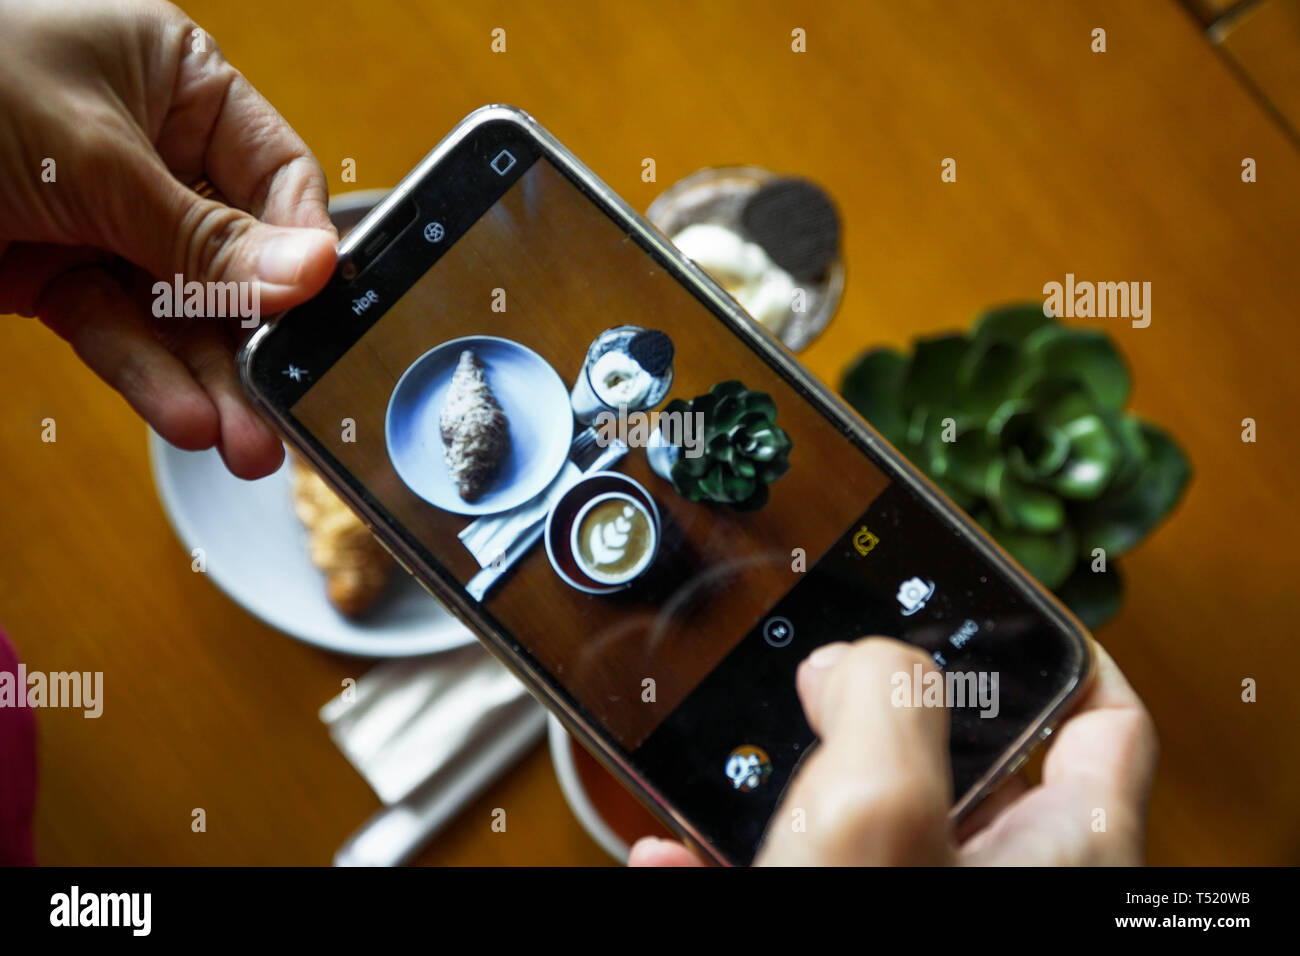 Food photography using mobile phone. Product photos of coffee latte, croissant chocolate, and blue ocean. Top view photo of food at a cafe to be Stock Photo